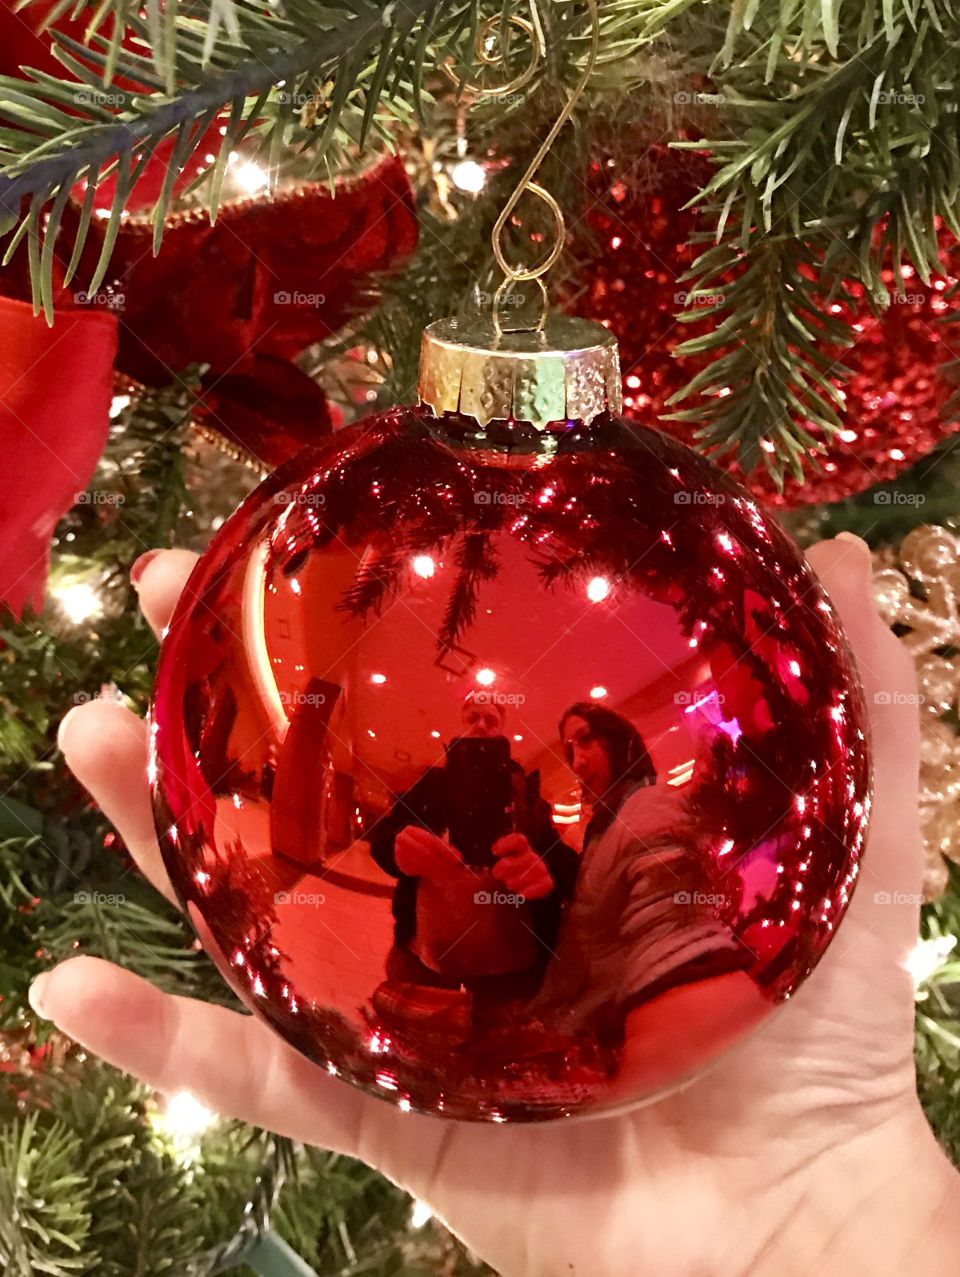 Red Color Story, red, round, reflecting, reflection, ornament, Christmas, ribbon, hand, hanging, decor, decoration, decorative, decorating